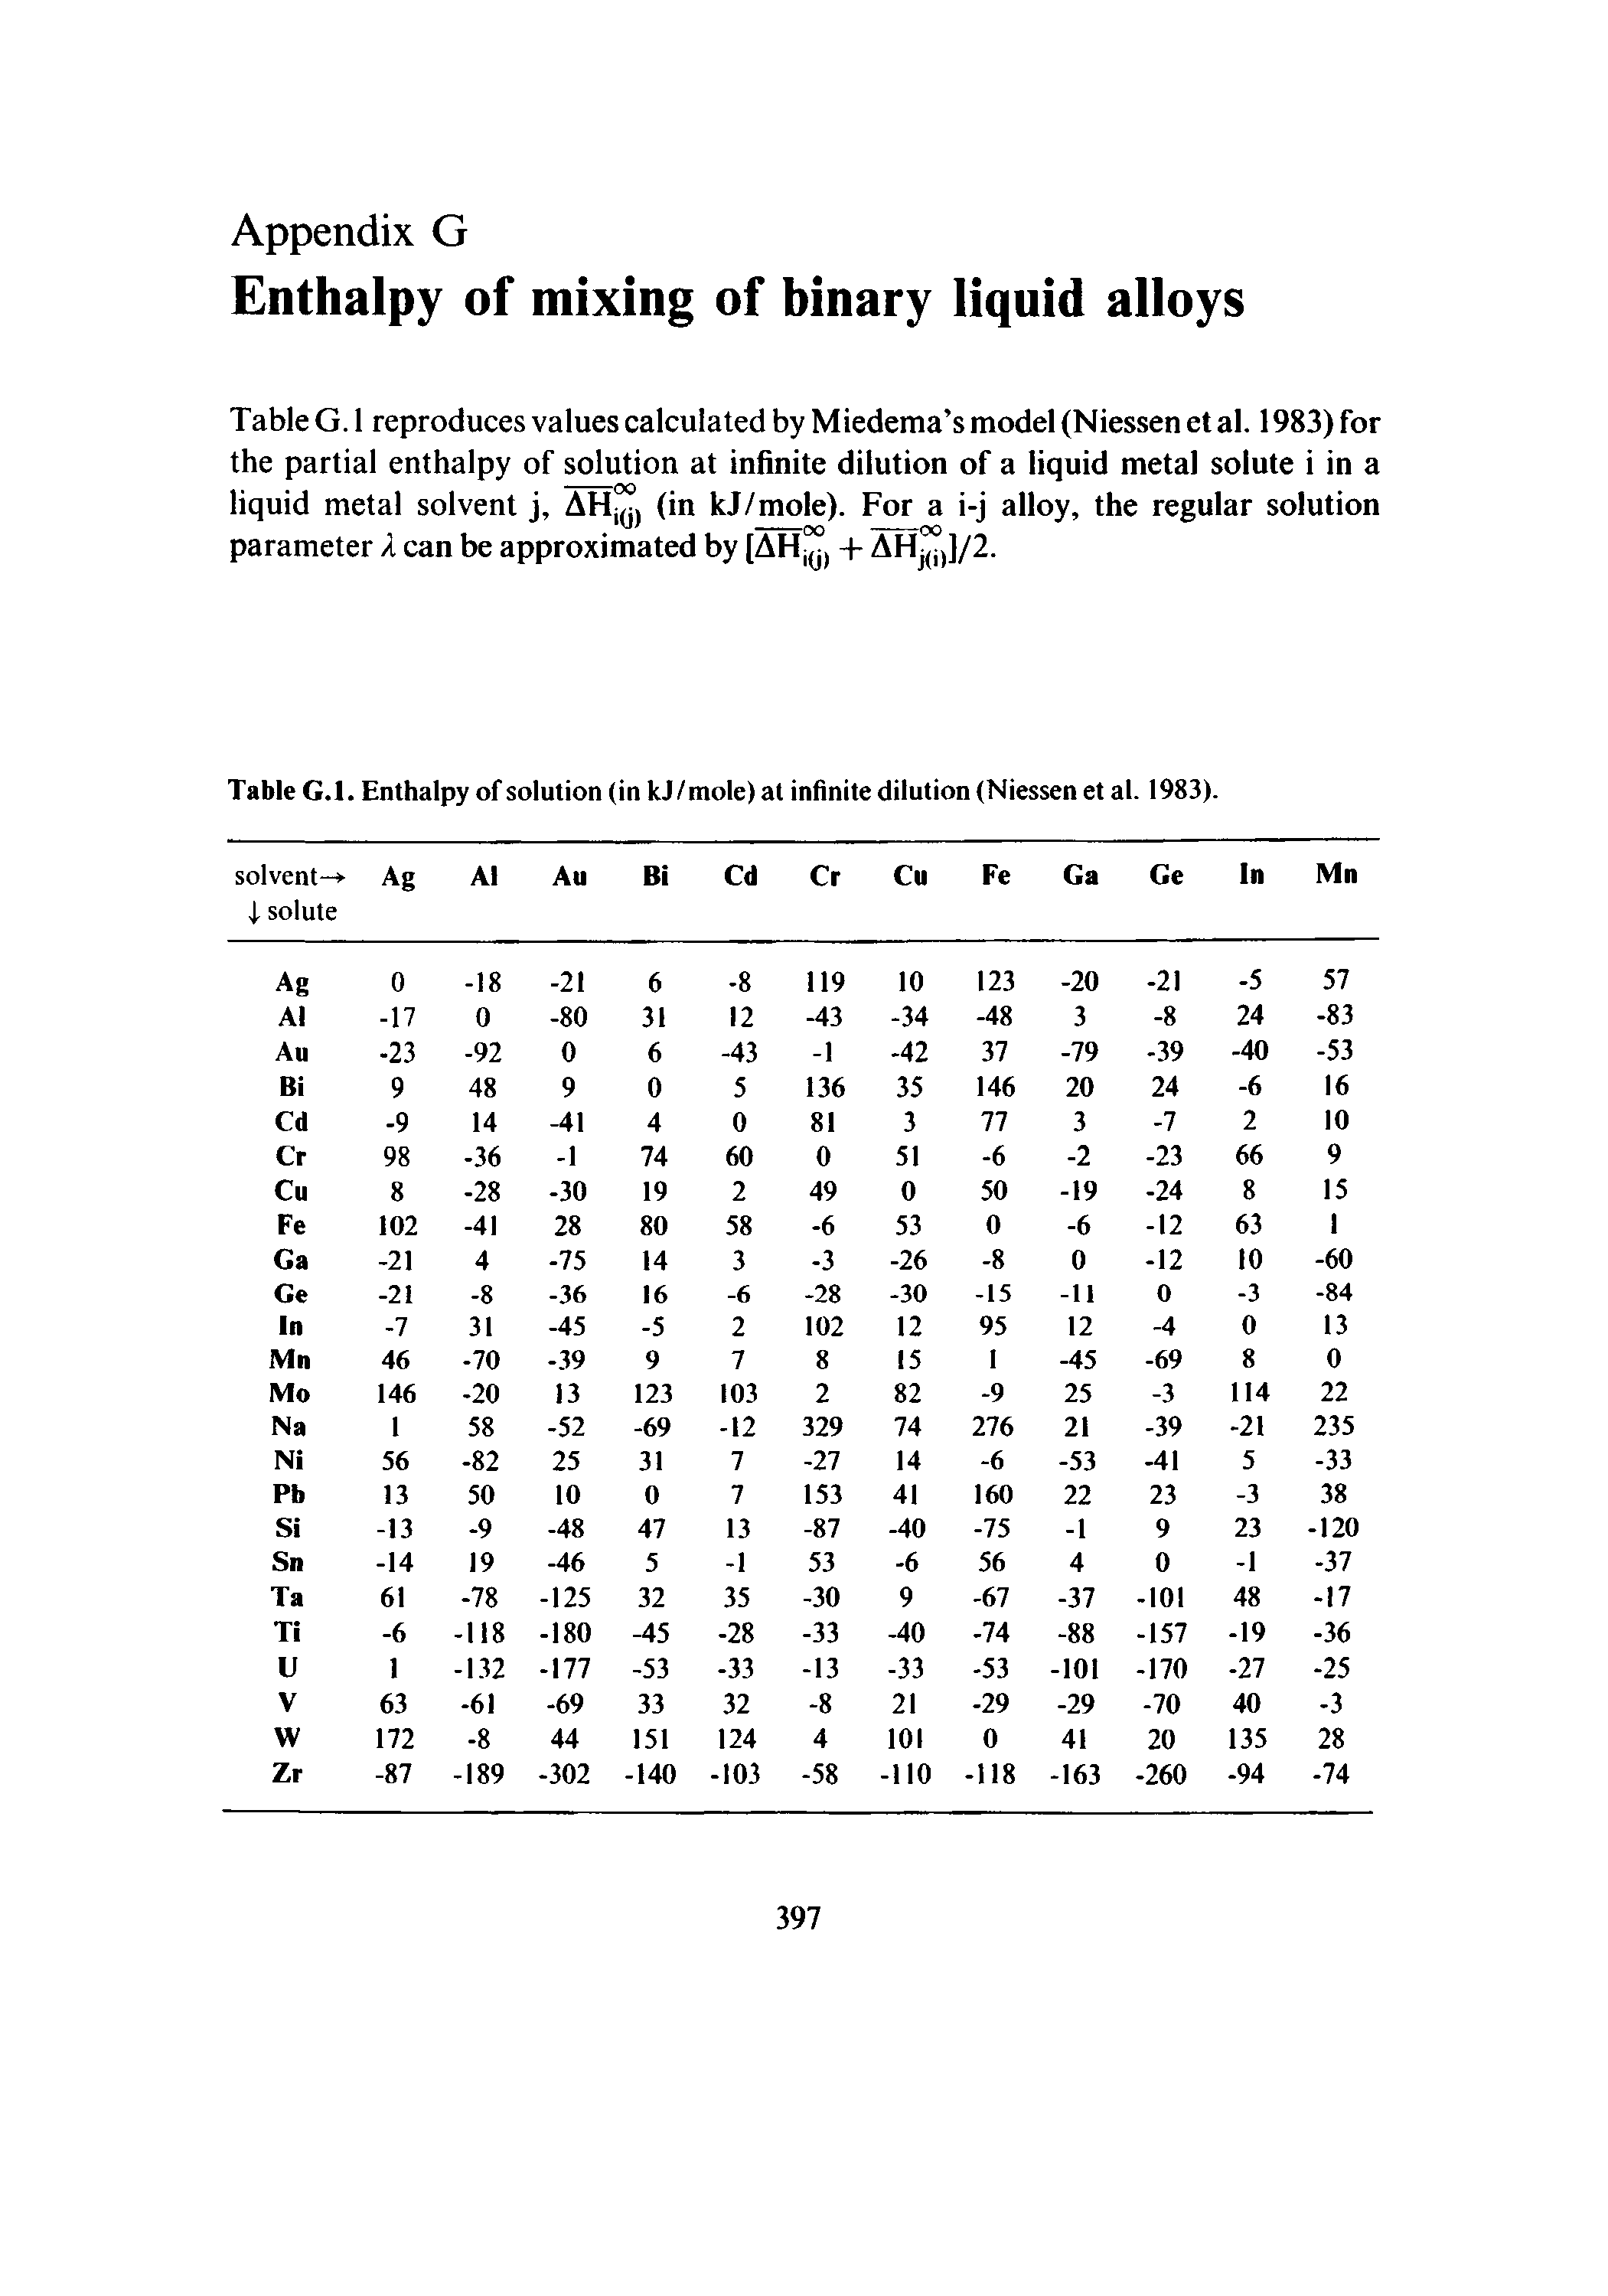 Table G. 1 reproduces values calculated by Miedema s model (Niessen et al. 1983) for the partial enthalpy of solution at infinite dilution of a liquid metal solute i in a liquid metal solvent i, AH, (in kJ/mole). For a i-j alloy, the regular solution parameter k can be approximated by [AHj(j( + AHJ(l)]/2.